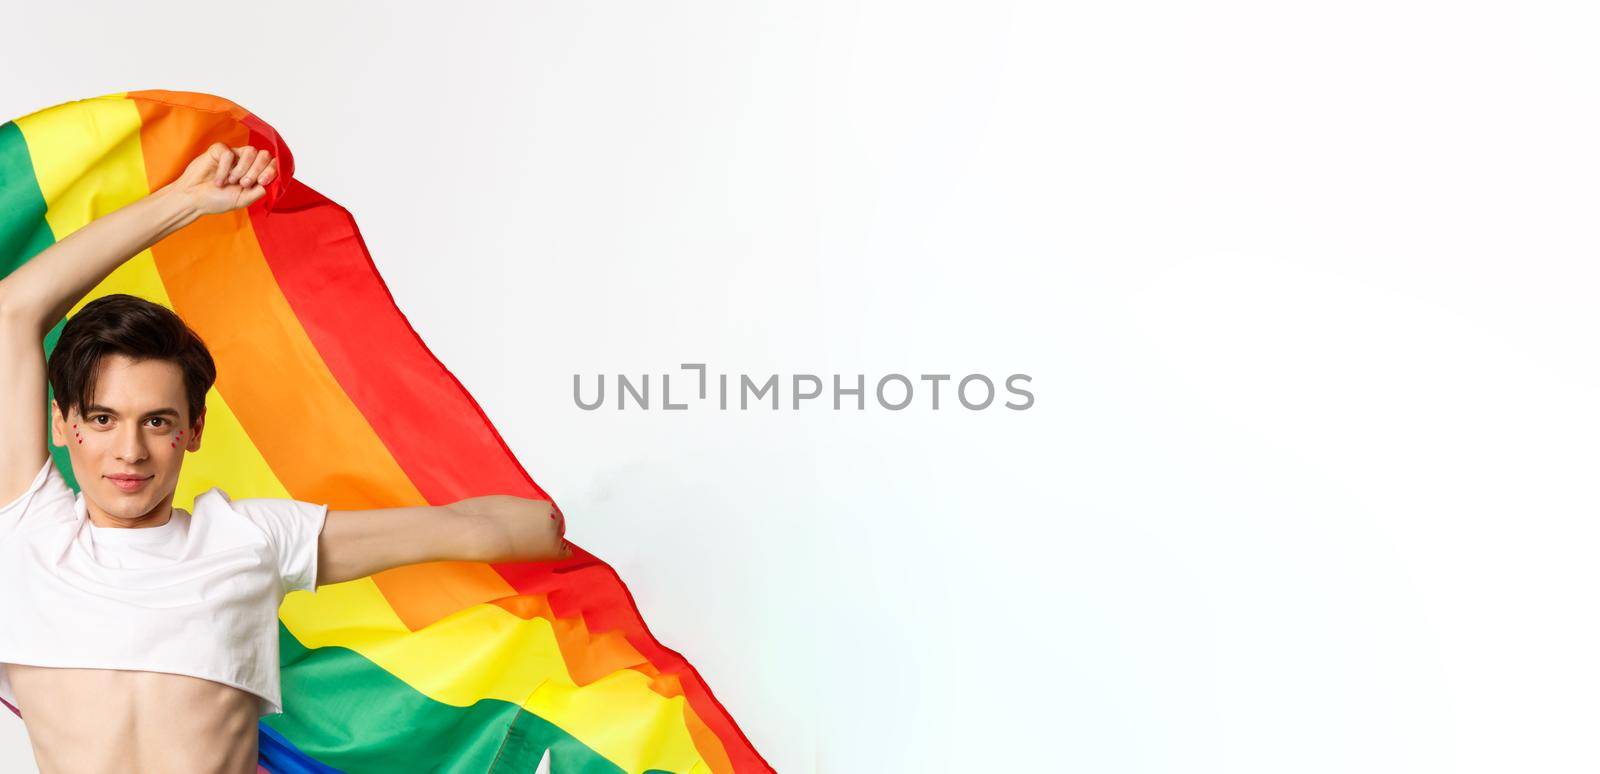 Vertical view of happy queer person in crop top and jeans waving raised rainbow flag, celebrating lgbtq holiday, standing over white background.